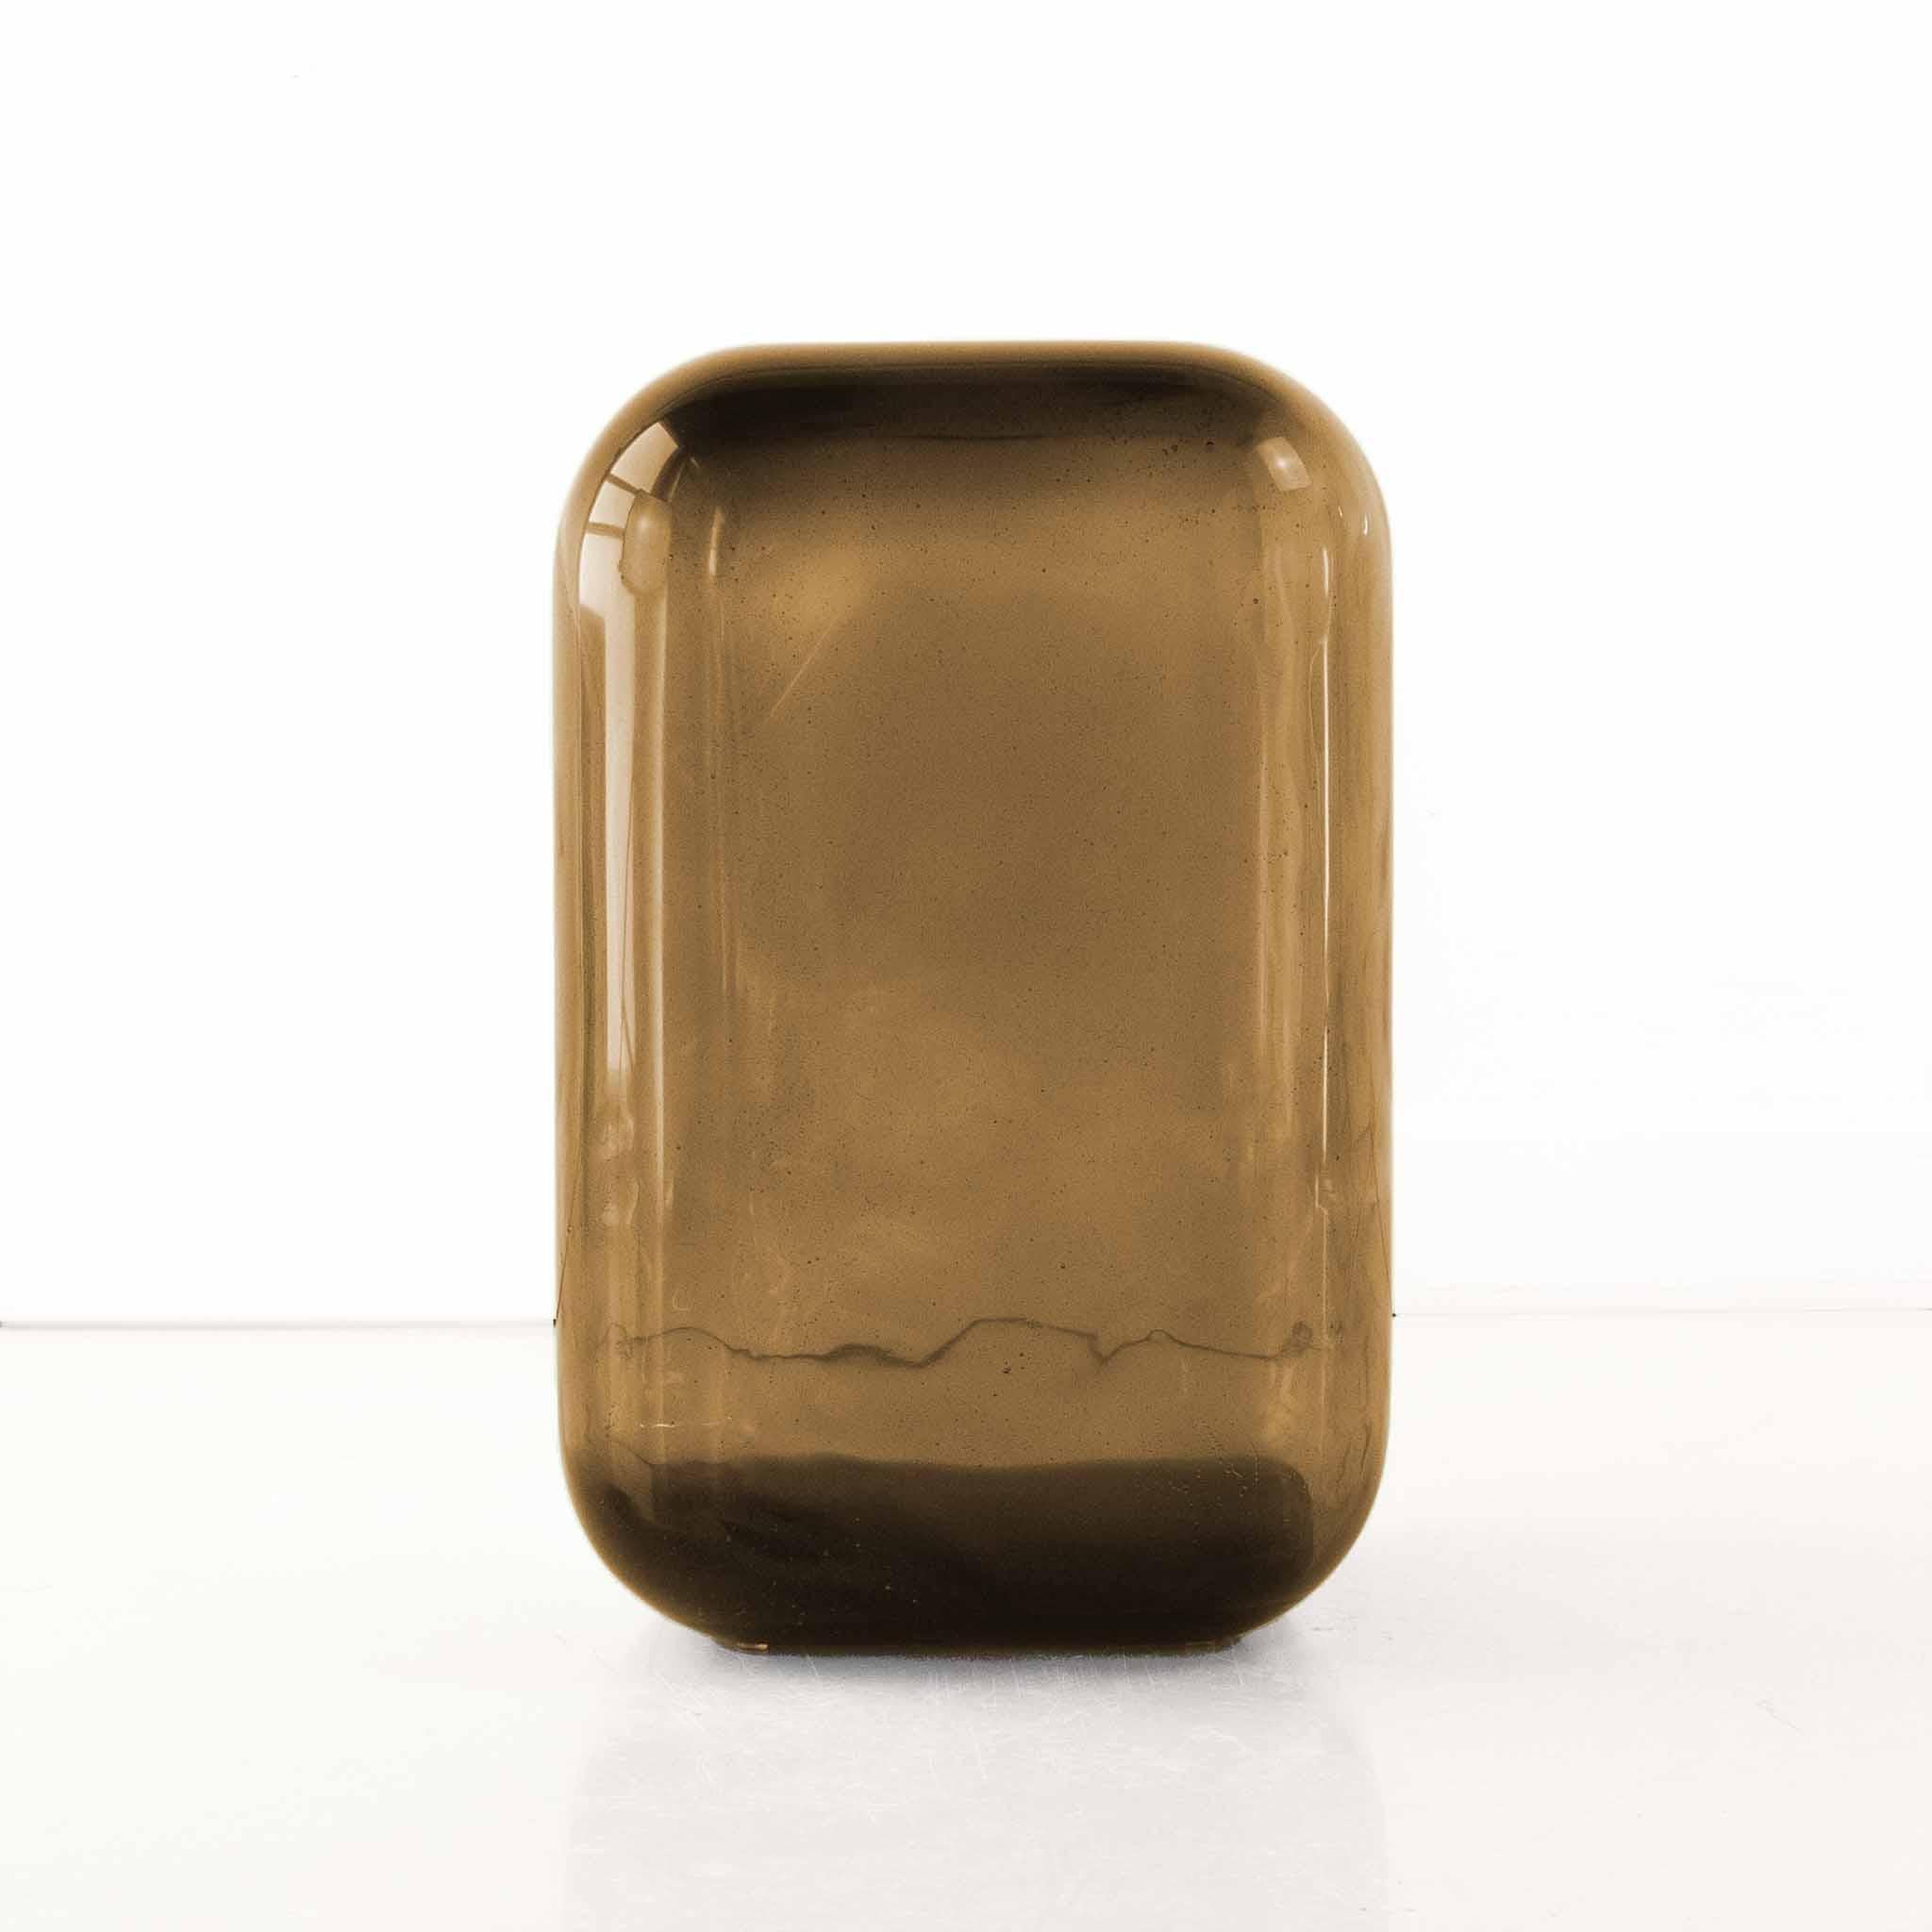 Ochre oort resin side table by creators of objects.
Materials: Resin, pigment
DImensions: W 36 x D 36 x H 56 cm
Also available: Tourmaline, bordeaux, spice, ochre, forest, ocean, twilight, rock, lilac, cerise, coral spice, honey, moss, surf, eve,